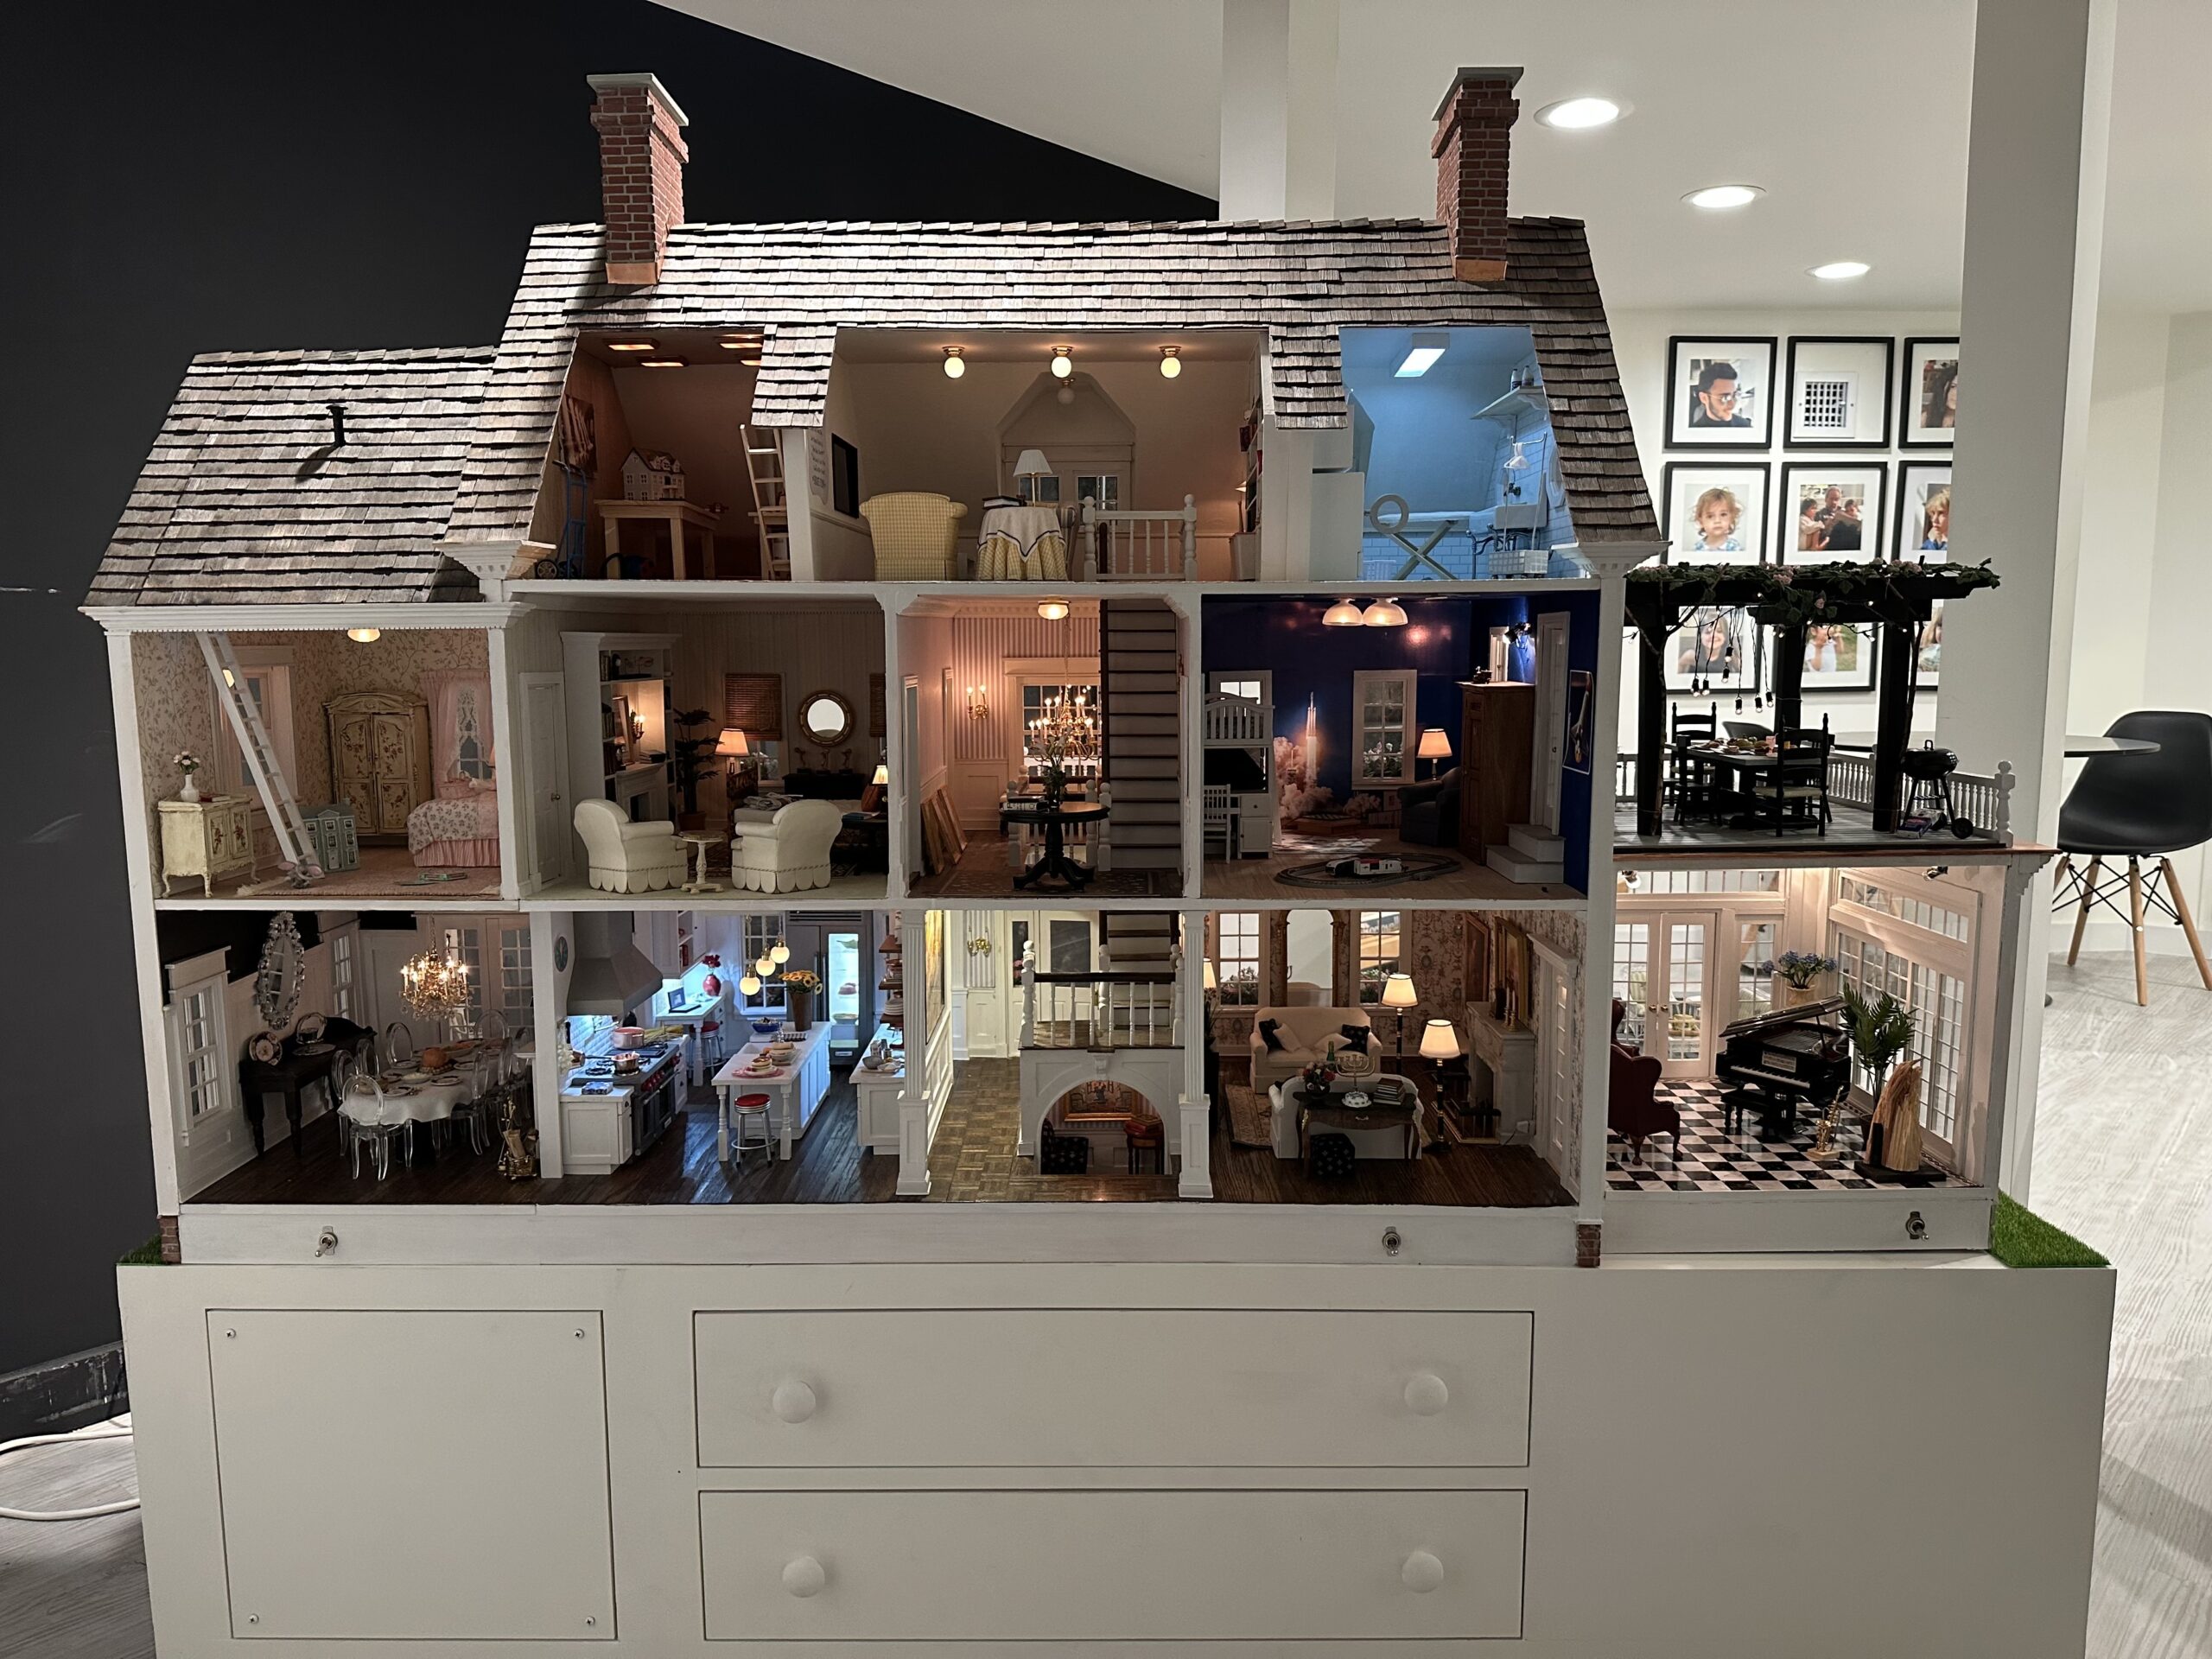 Barrett's Doll House will be on view at The Church’s second annual Holiday Maker’s Market.